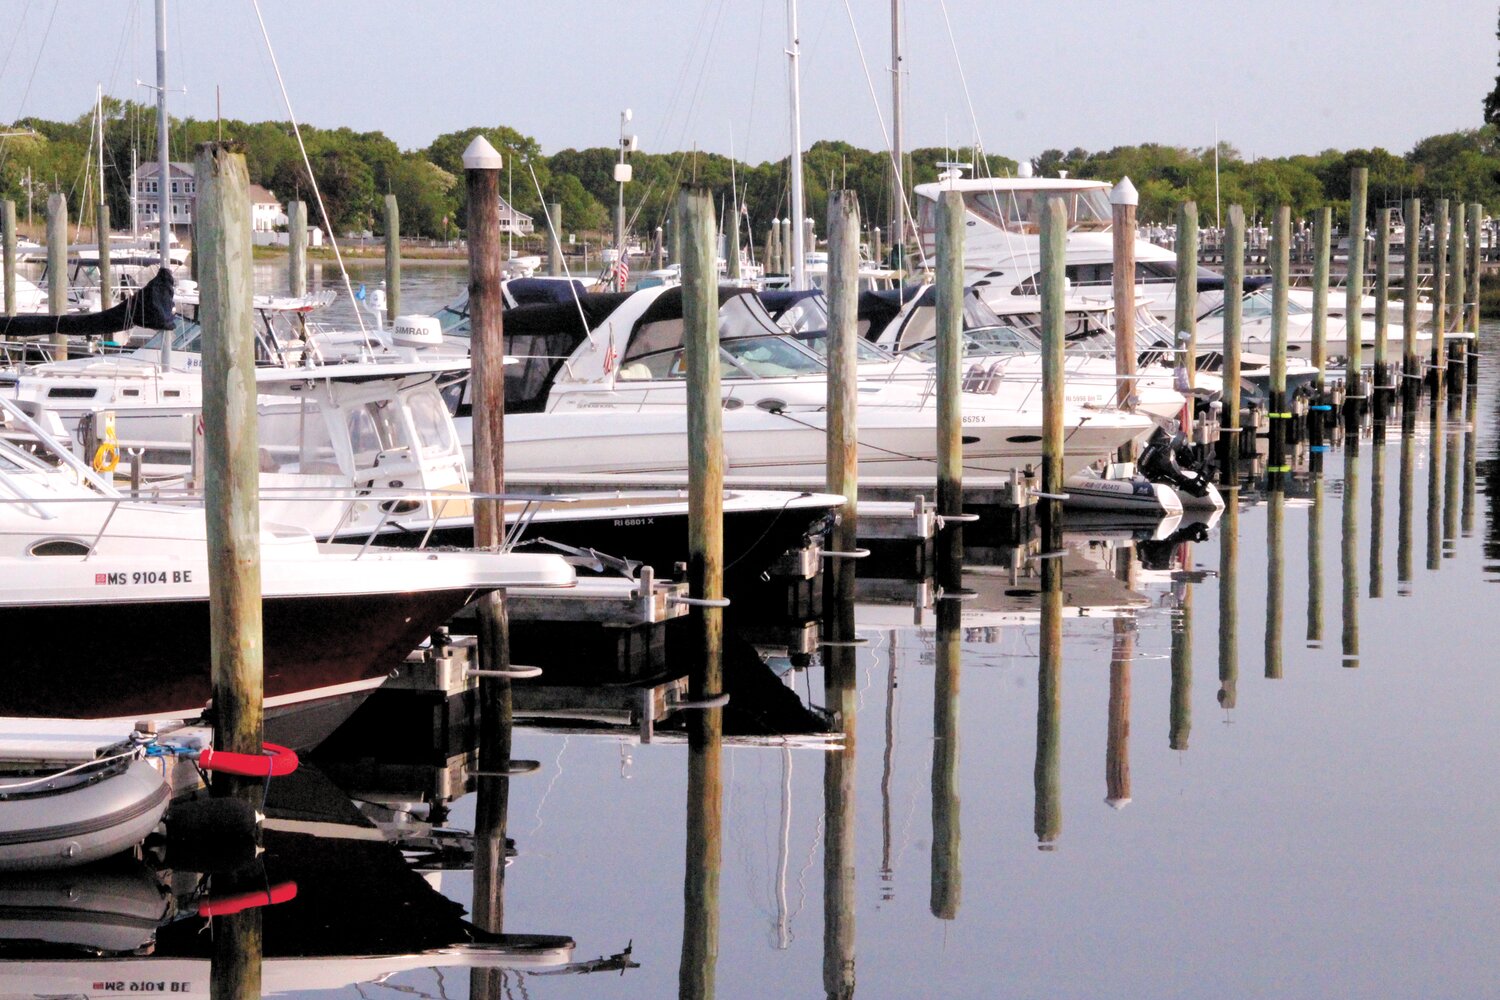 MORNING REFLECTIONS: Pilings and the more than 200 boats berthed at the Harbor Lights marina are reflected in the still waters of Warwick Cove.